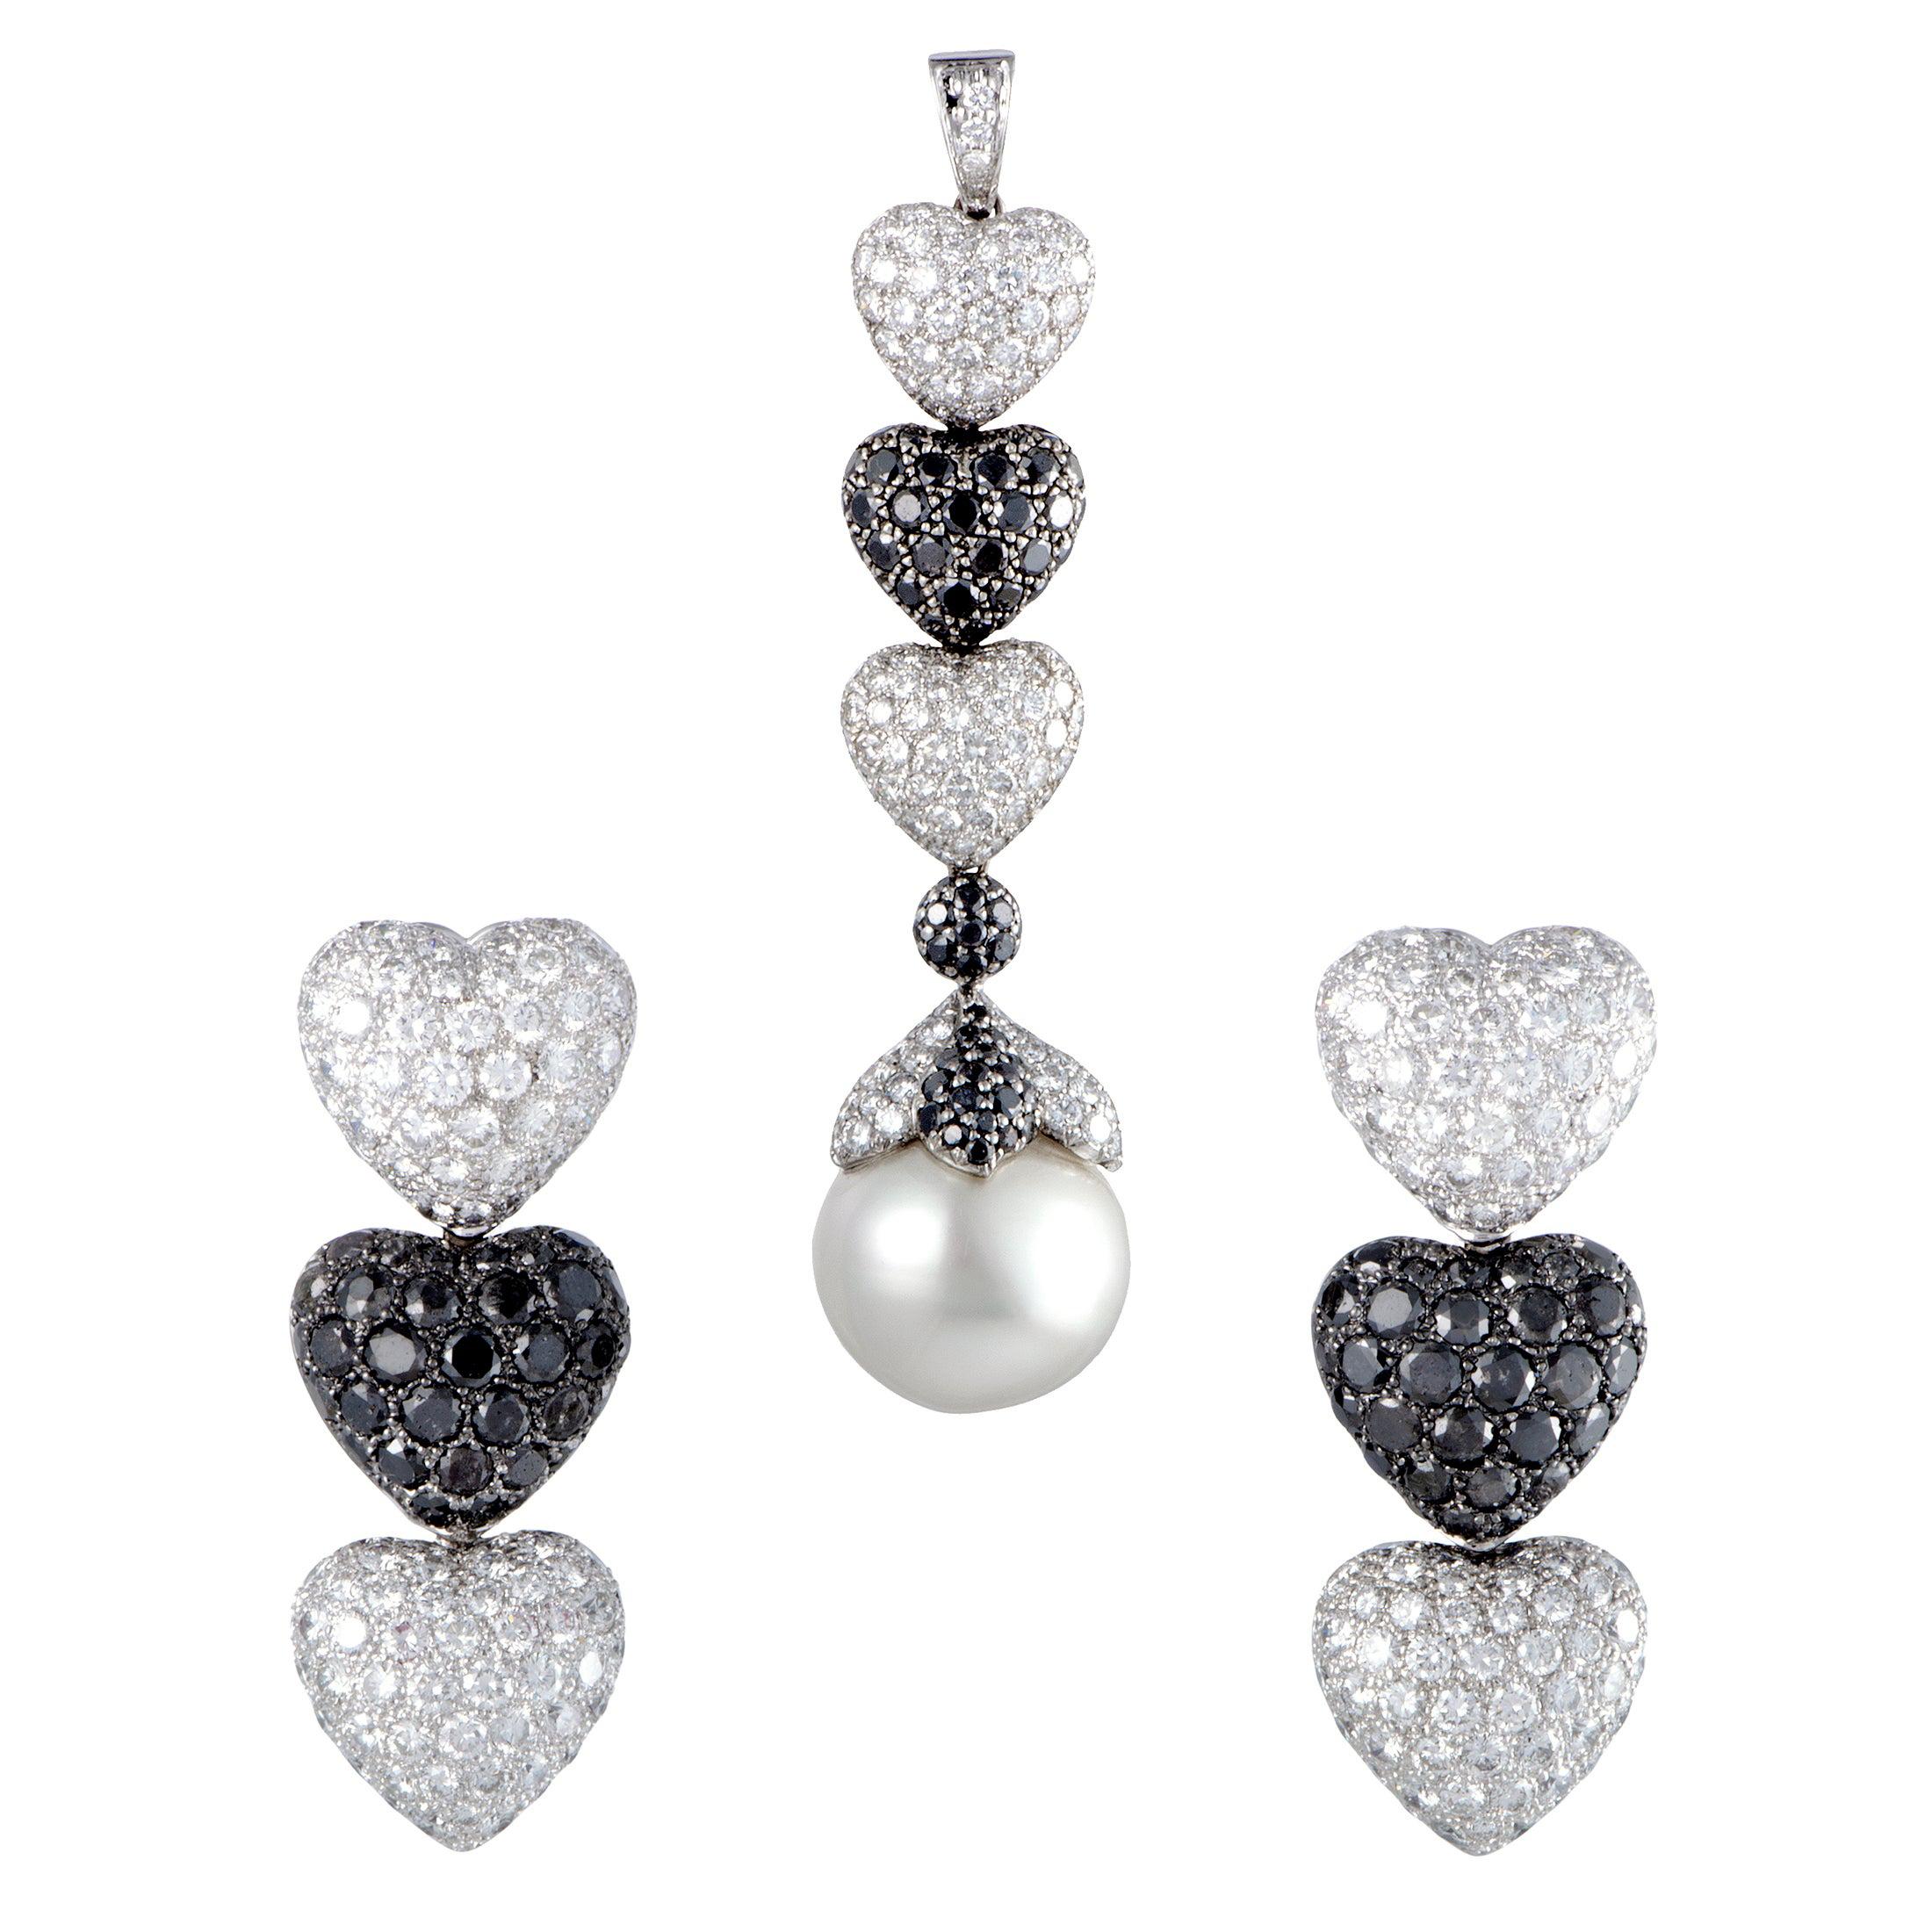 de Grisogono Diamond Pave and Pearl White Gold Earrings and Pendant Set